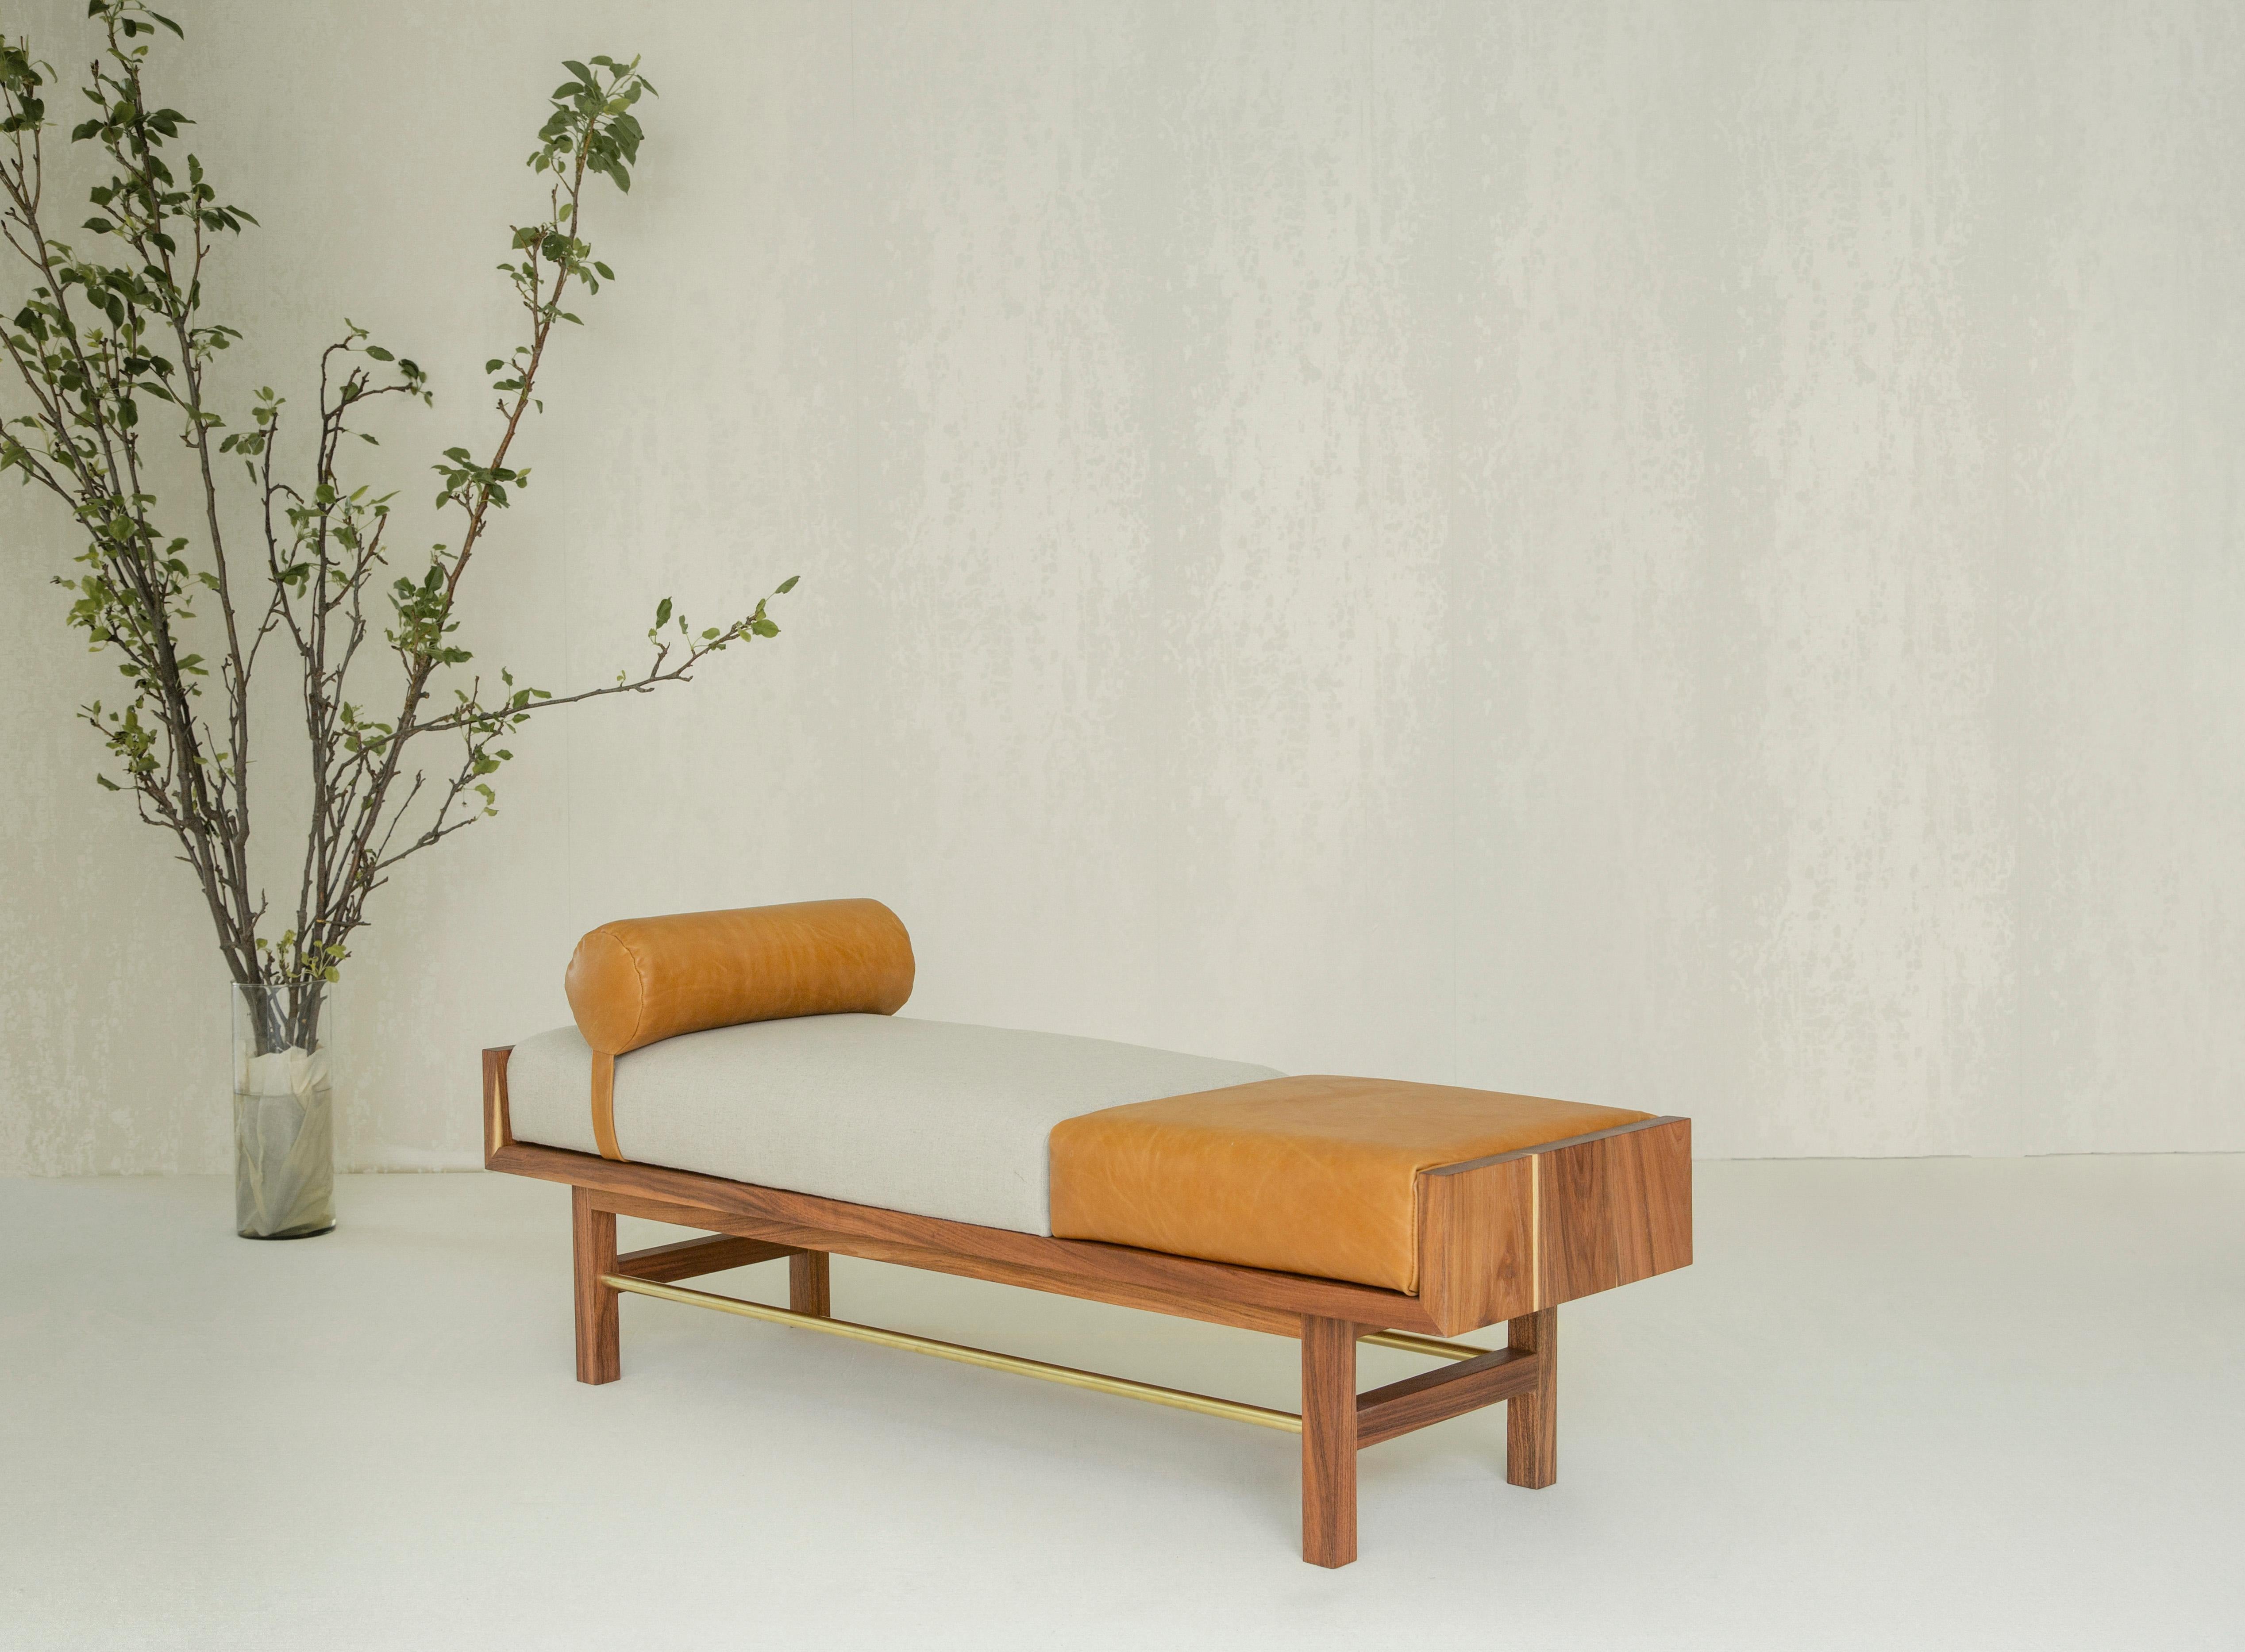 The Paris bench is made out of a Mexican wood called Tzalam. It has a unique combination of linen and leather upholstery. The bench is a perfect piece to place in a living room, front of bed or any space.